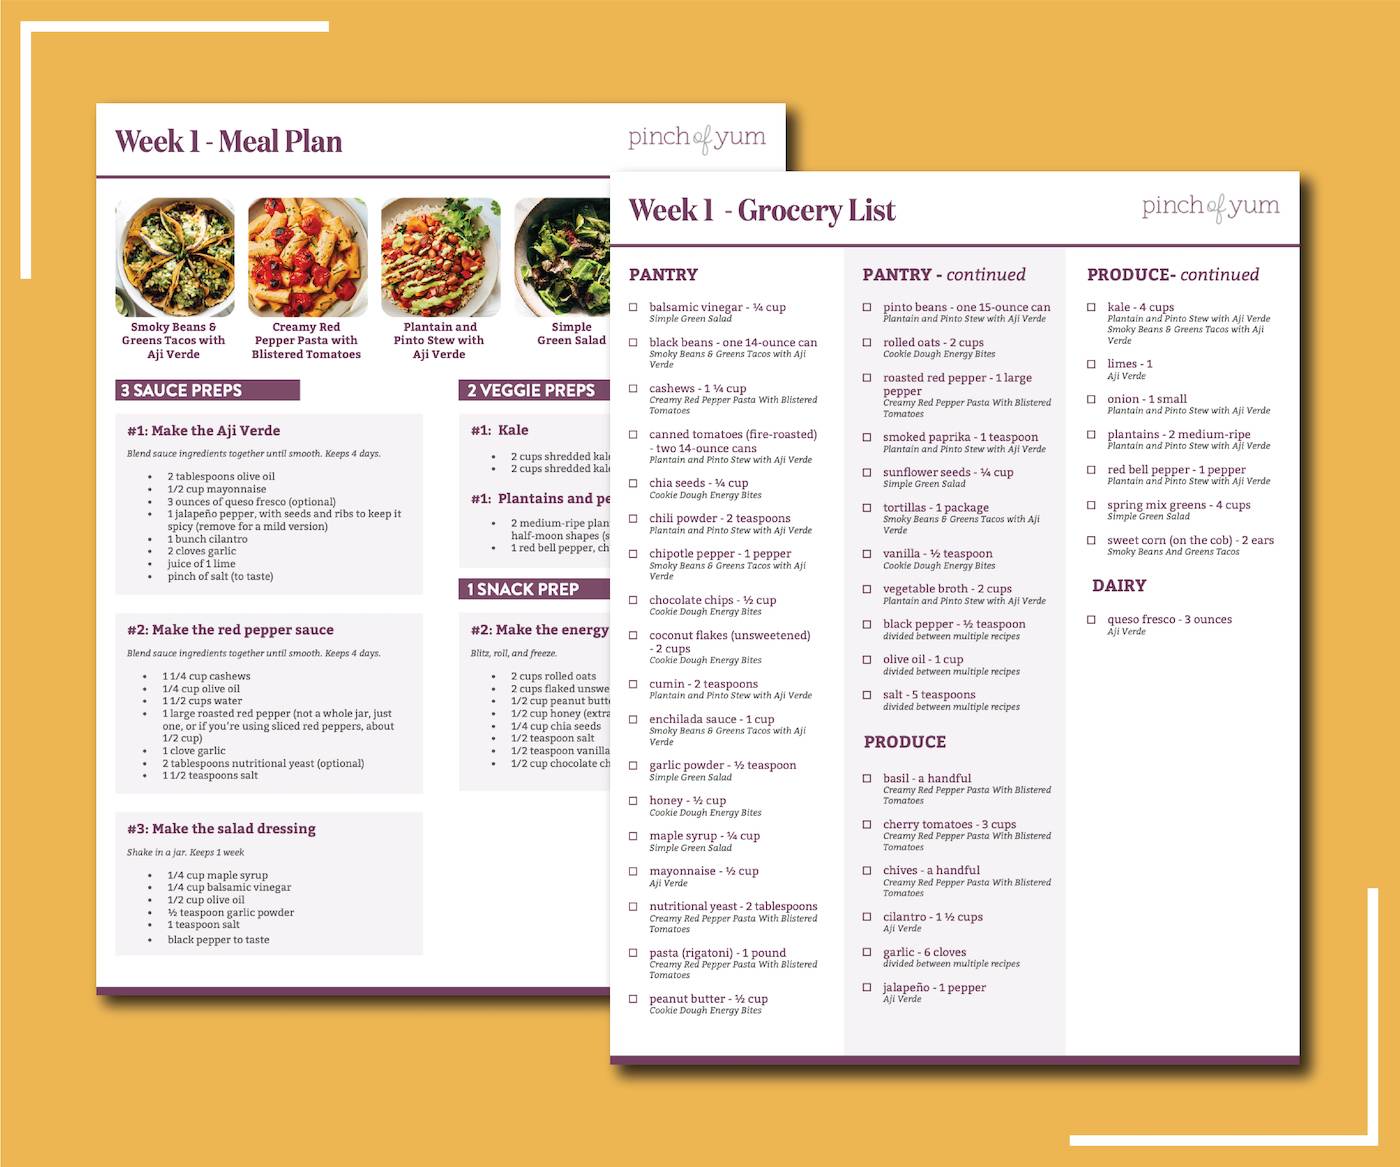 Meal plan guide and grocery list